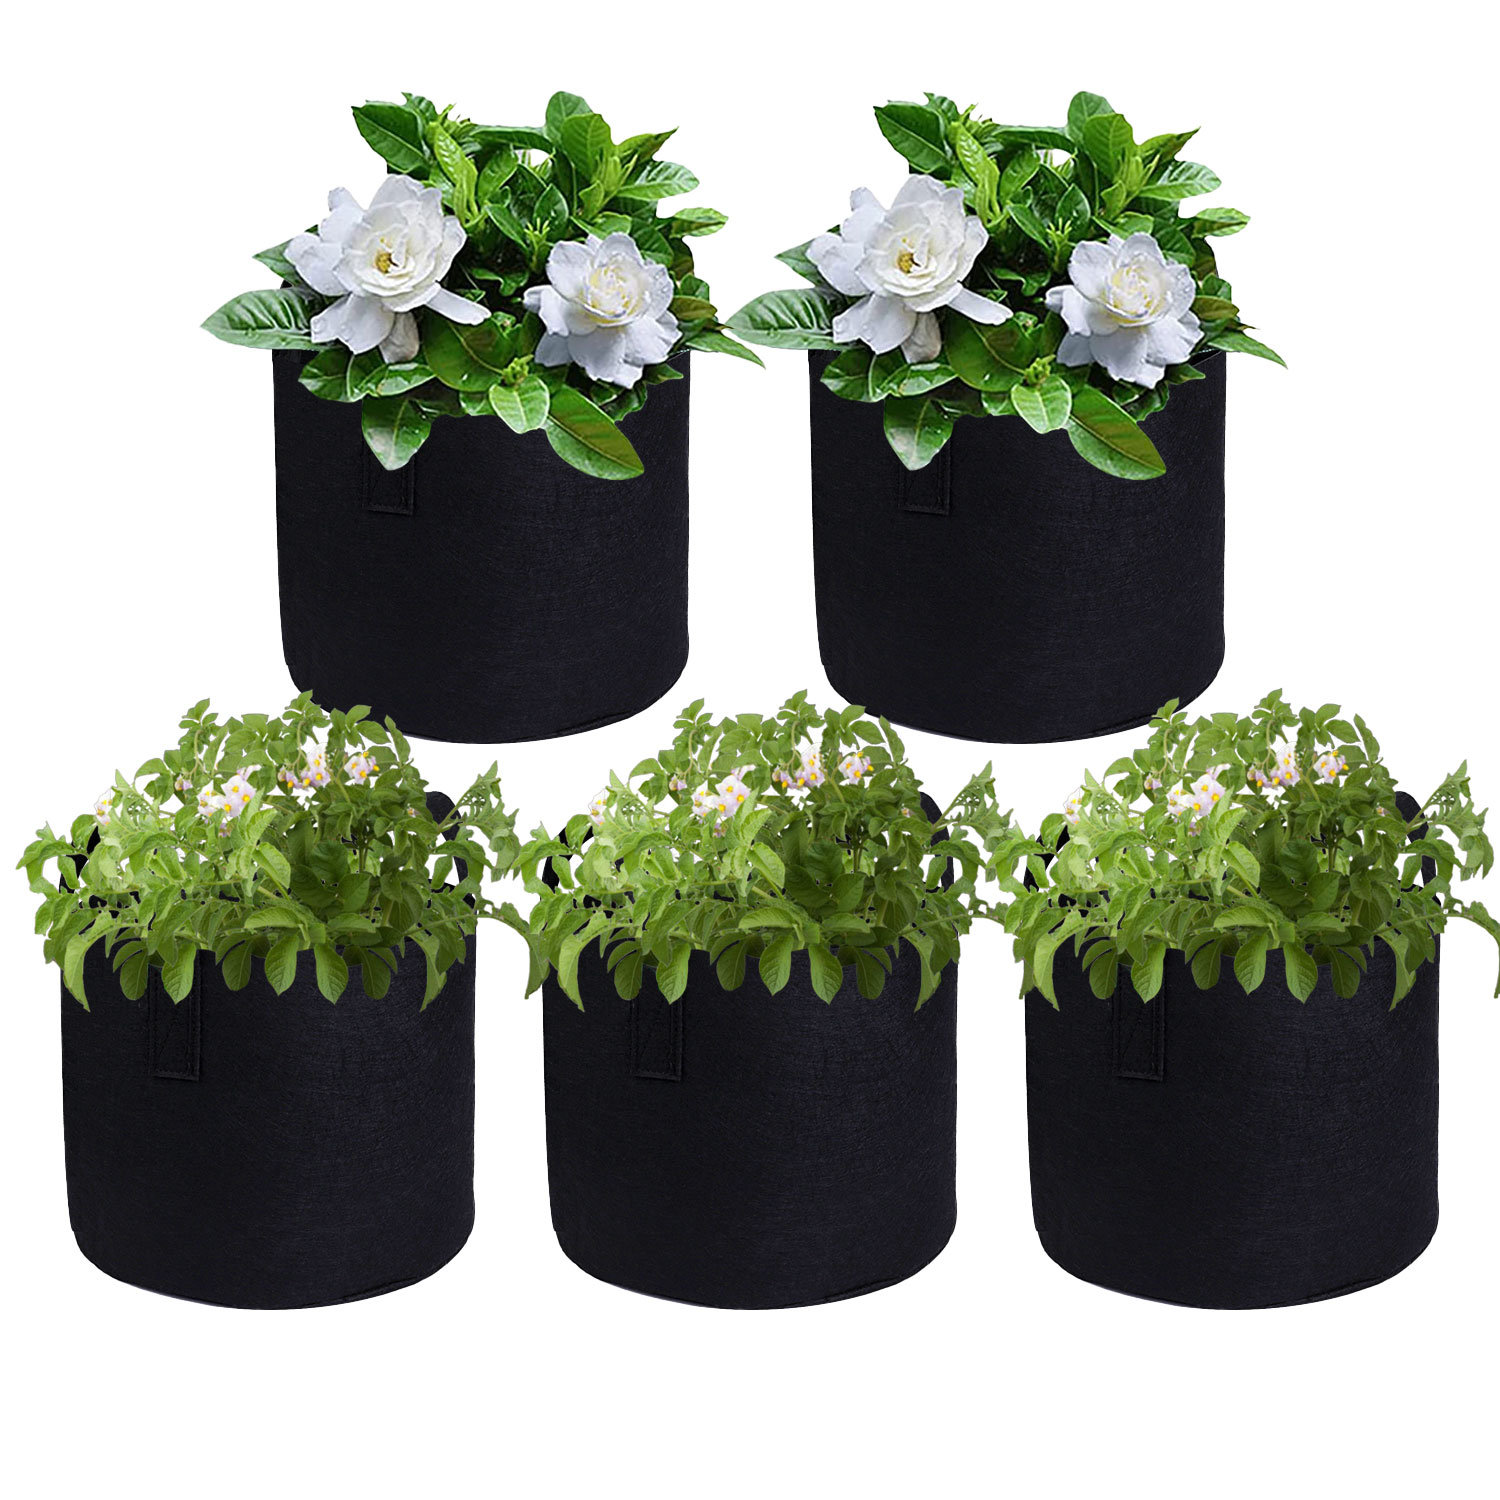 Fabric Grow Pots Breathable Bag Root Container Plant Pouch Grow Bag 